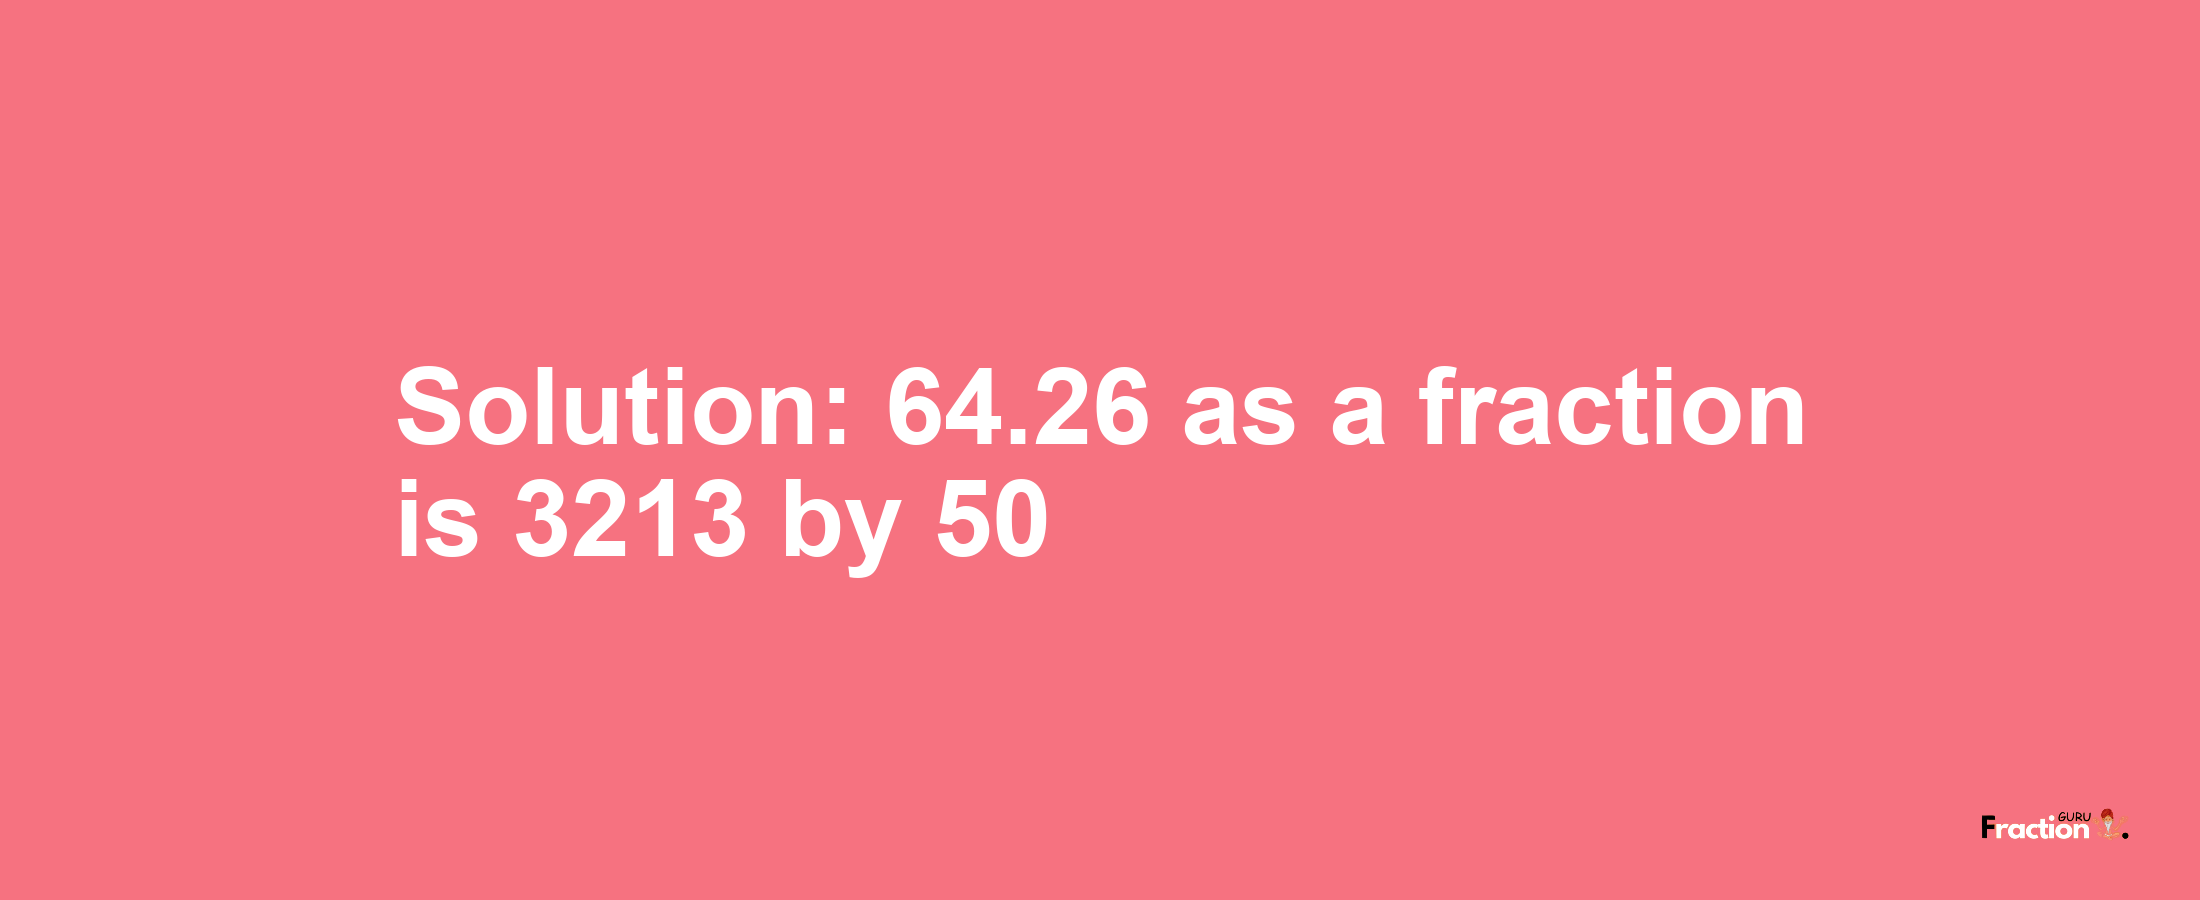 Solution:64.26 as a fraction is 3213/50